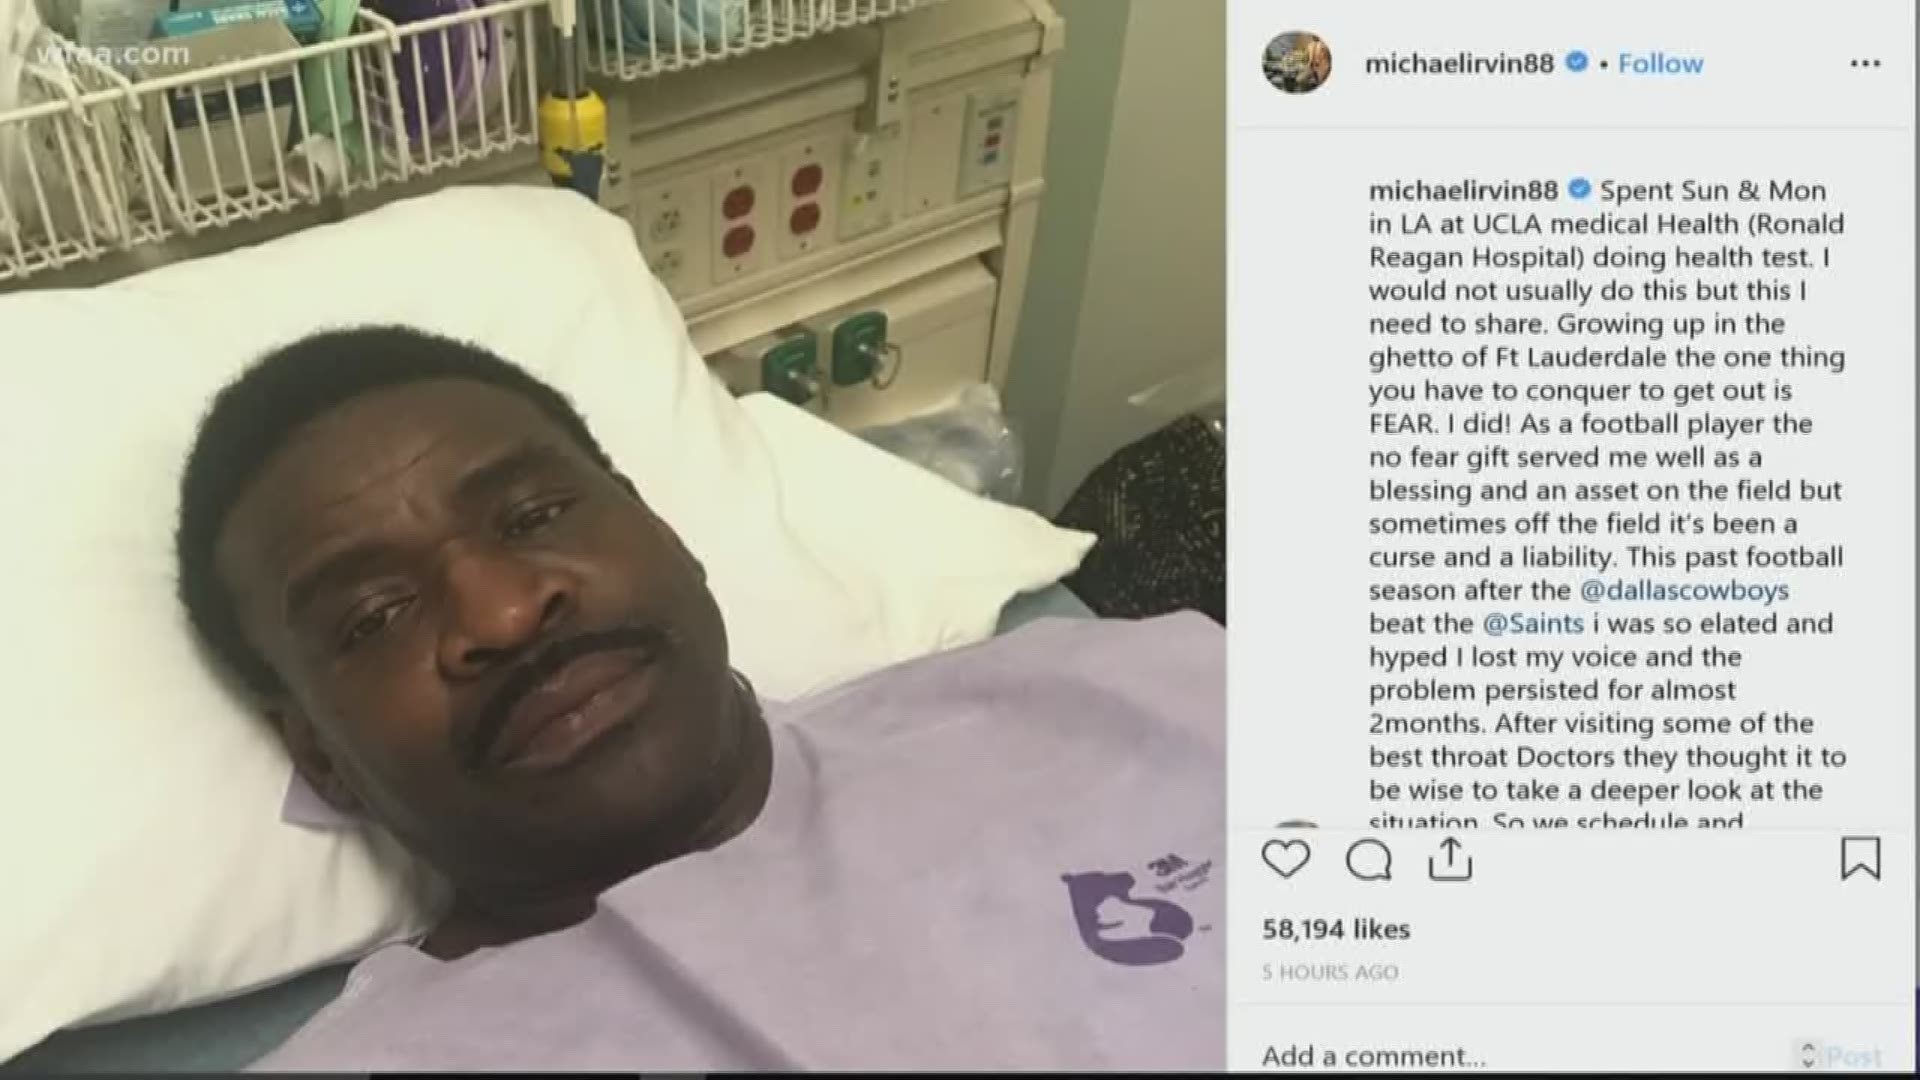 Former Dallas Cowboys wide receiver Michael Irvin posted a photo of himself in a hospital bed in Los Angeles on Instagram Tuesday, saying he is worried he may have throat cancer and has been undergoing tests for the disease.